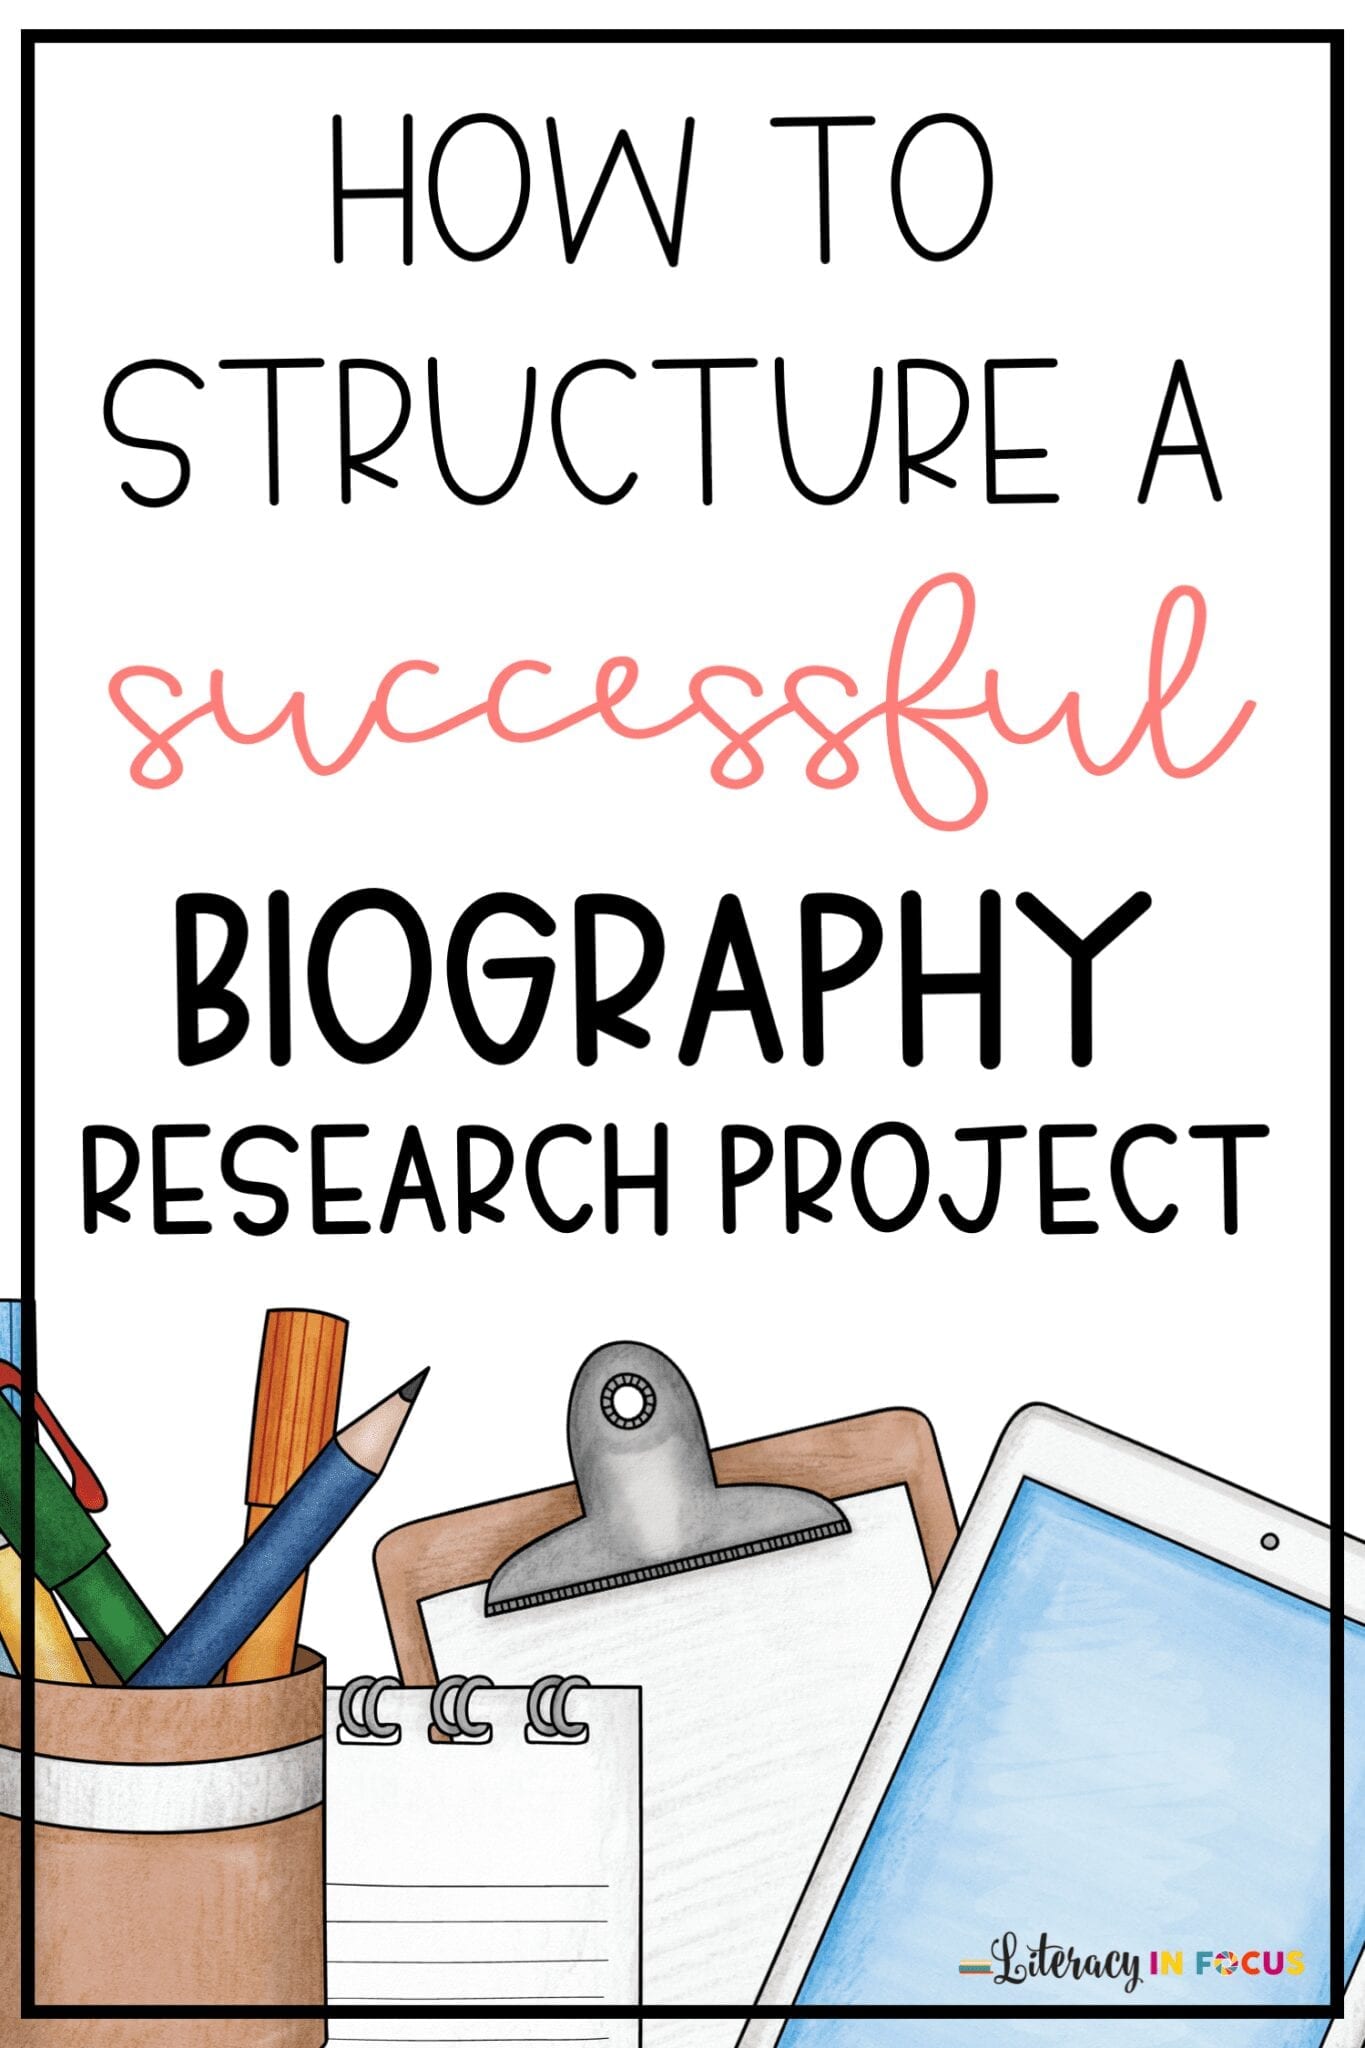 How To Structure A Successful Biography Research Project